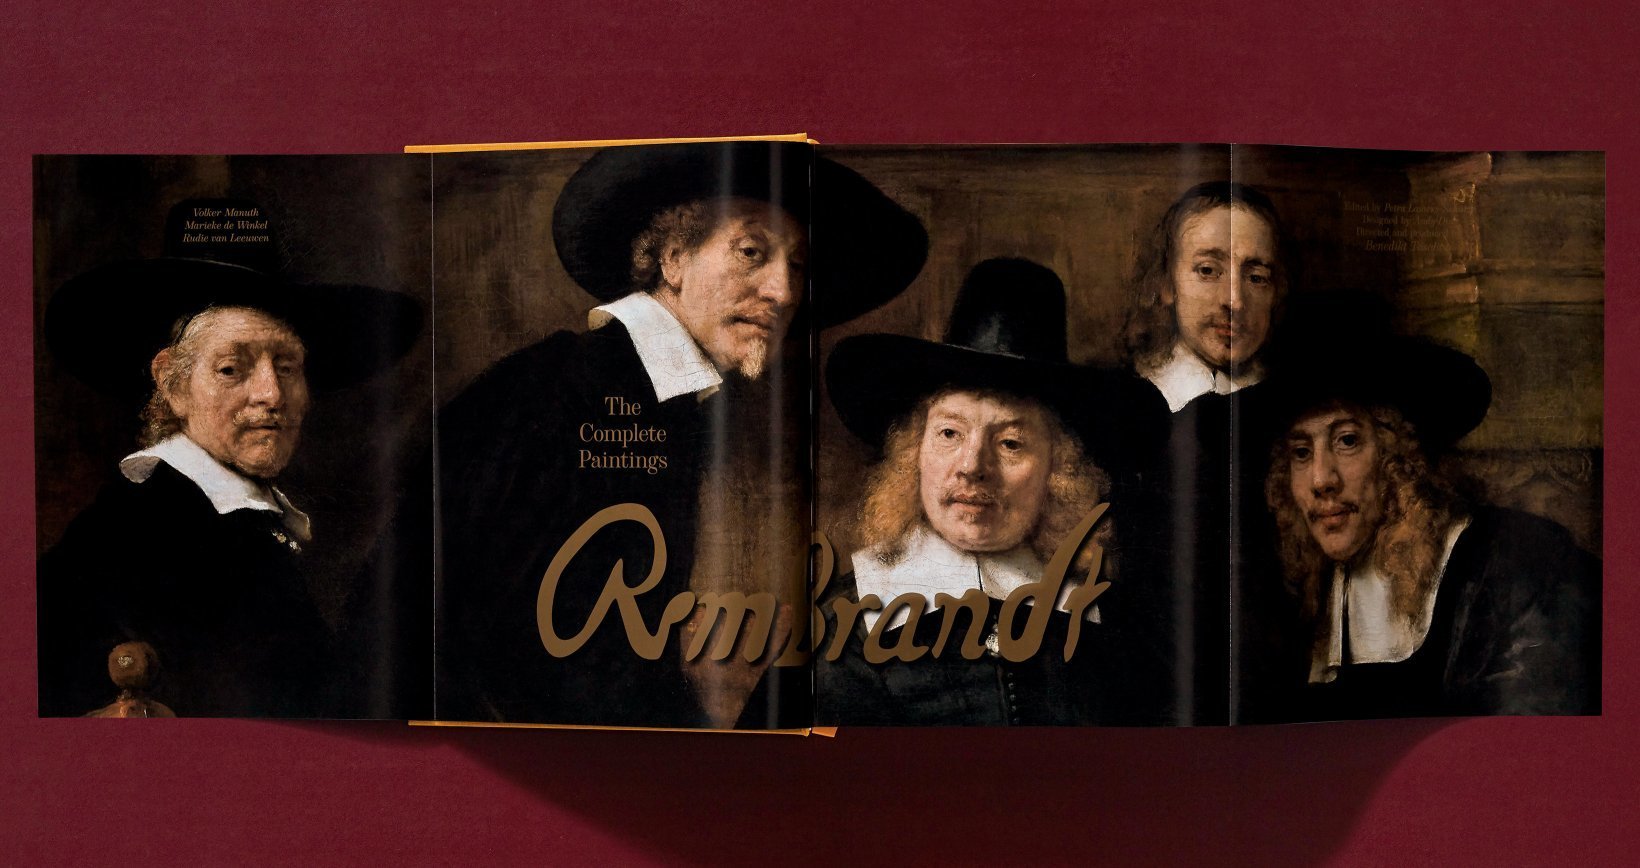 Rembrandt. The Complete Paintings - XXL